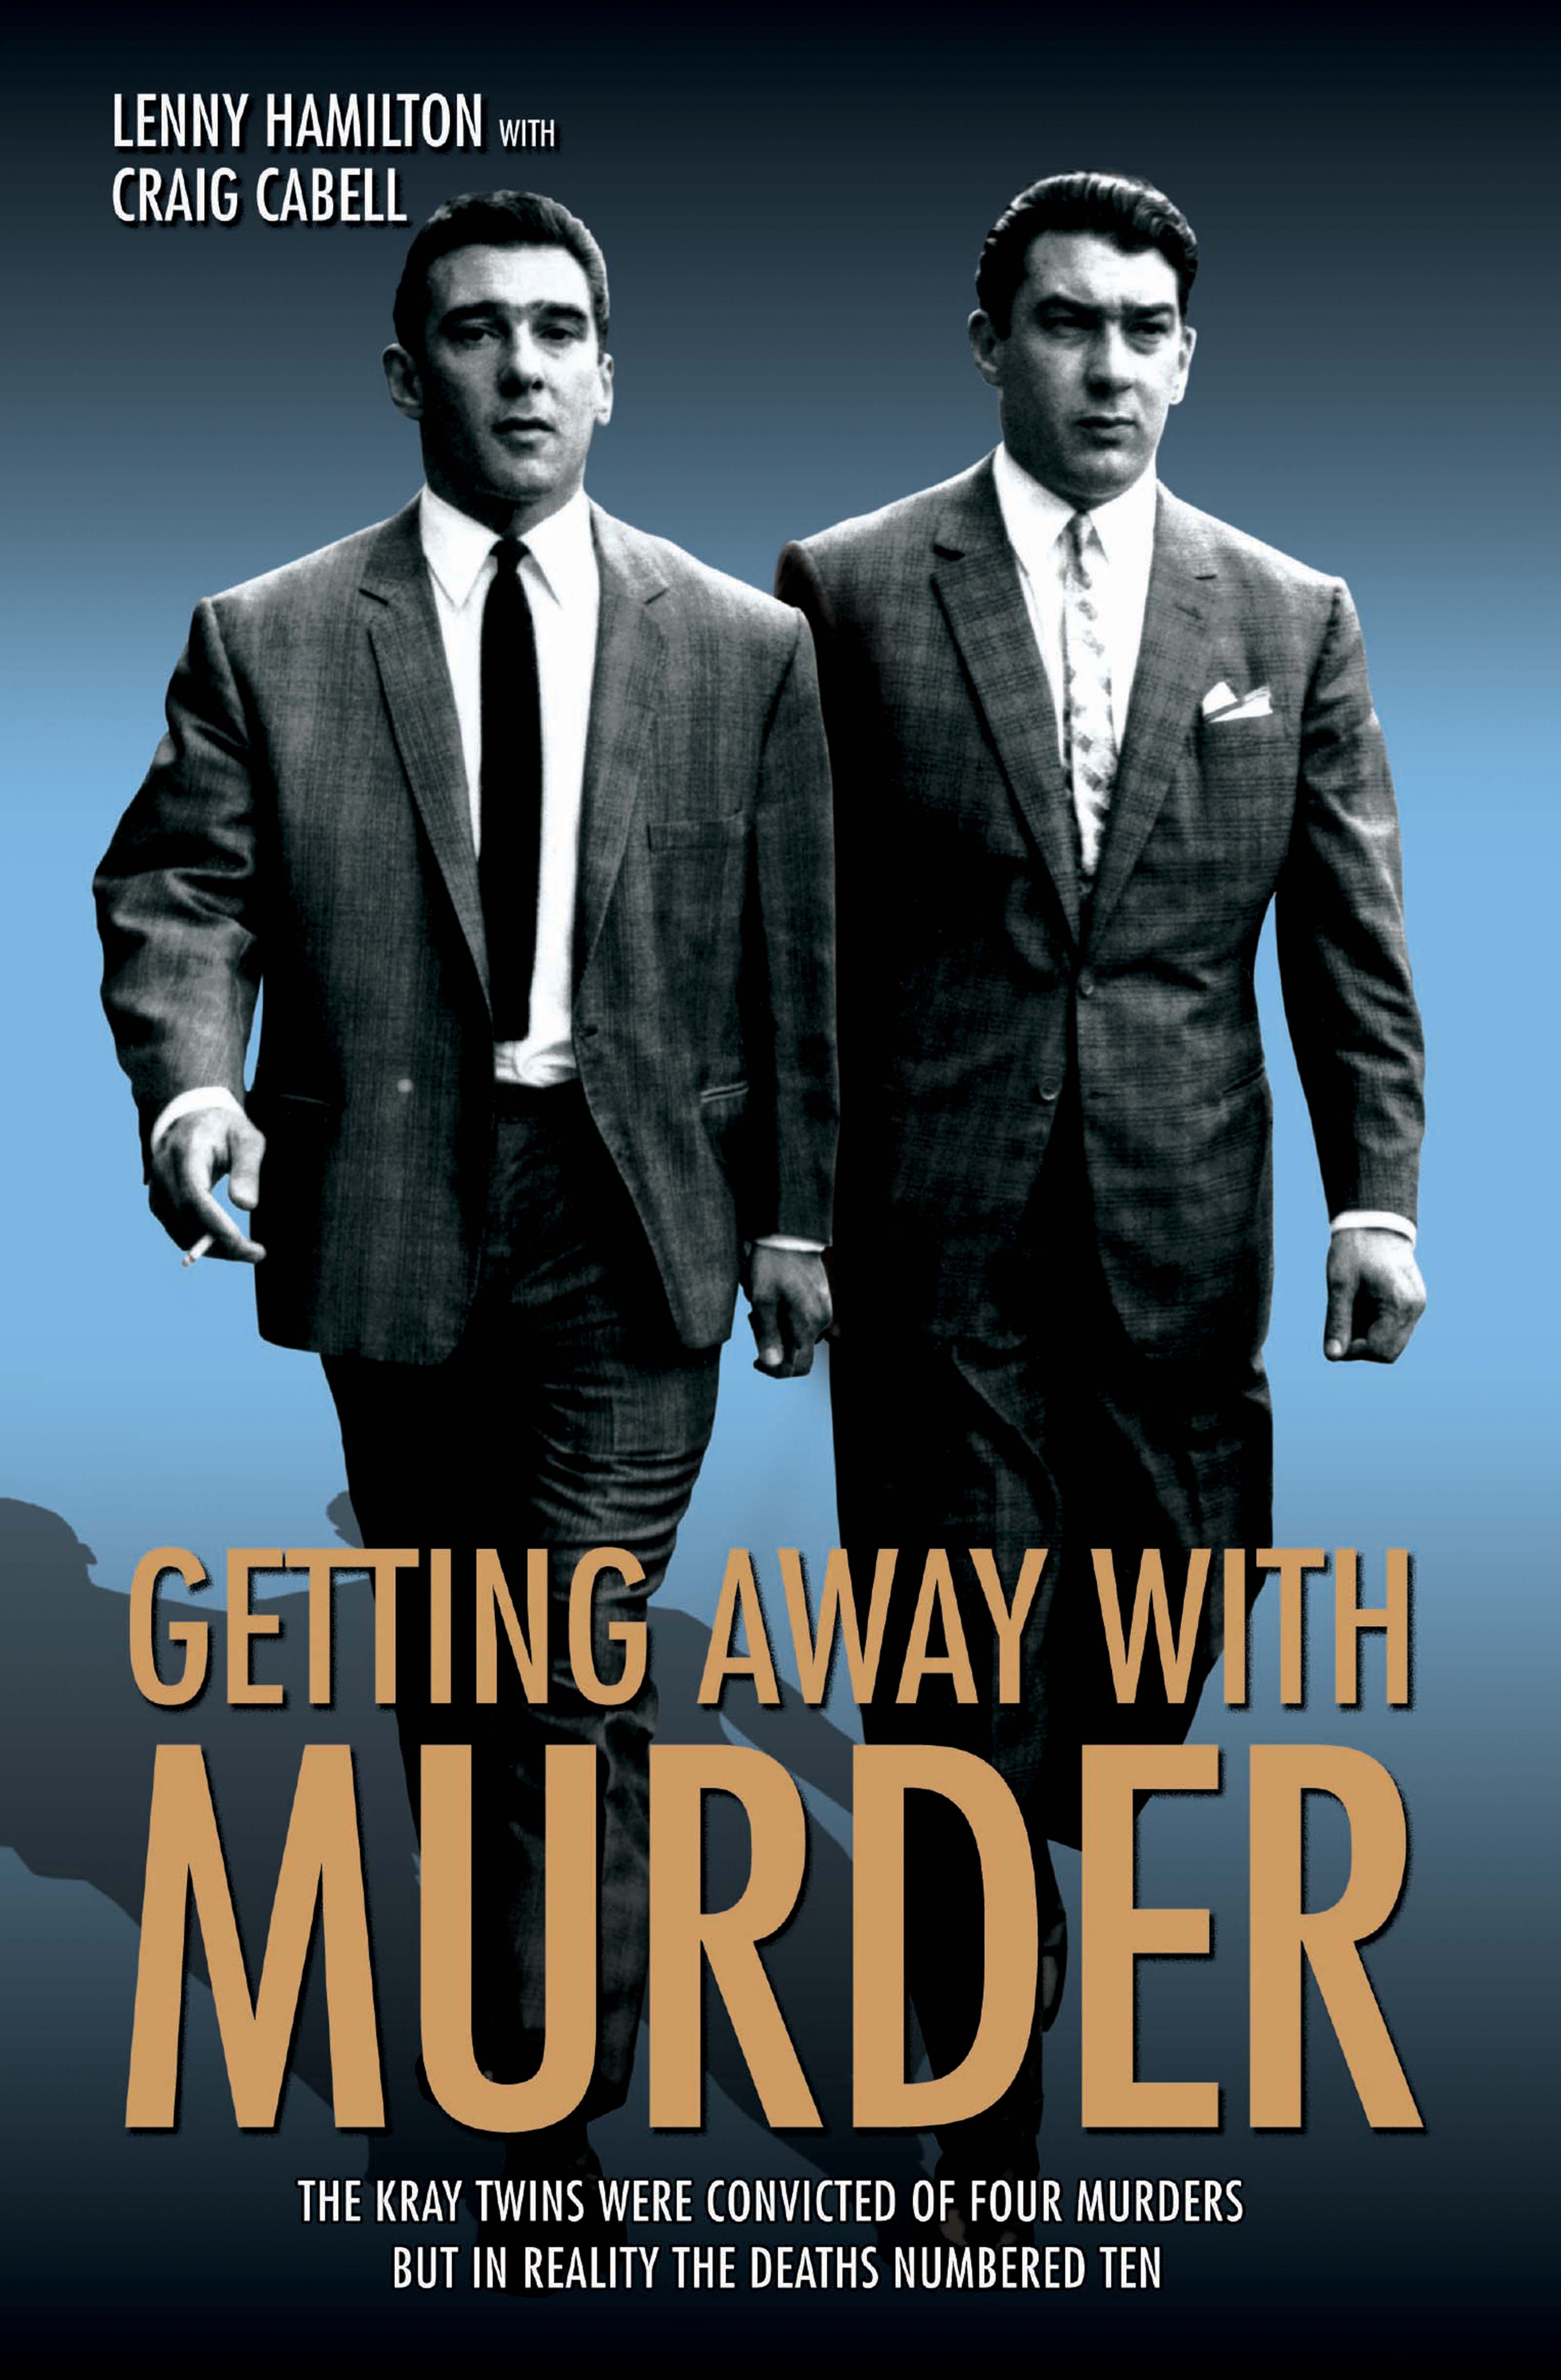 Getting Away With Murder - The Kray Twins were convicted of four murders but in reality the deaths numbered ten - <10